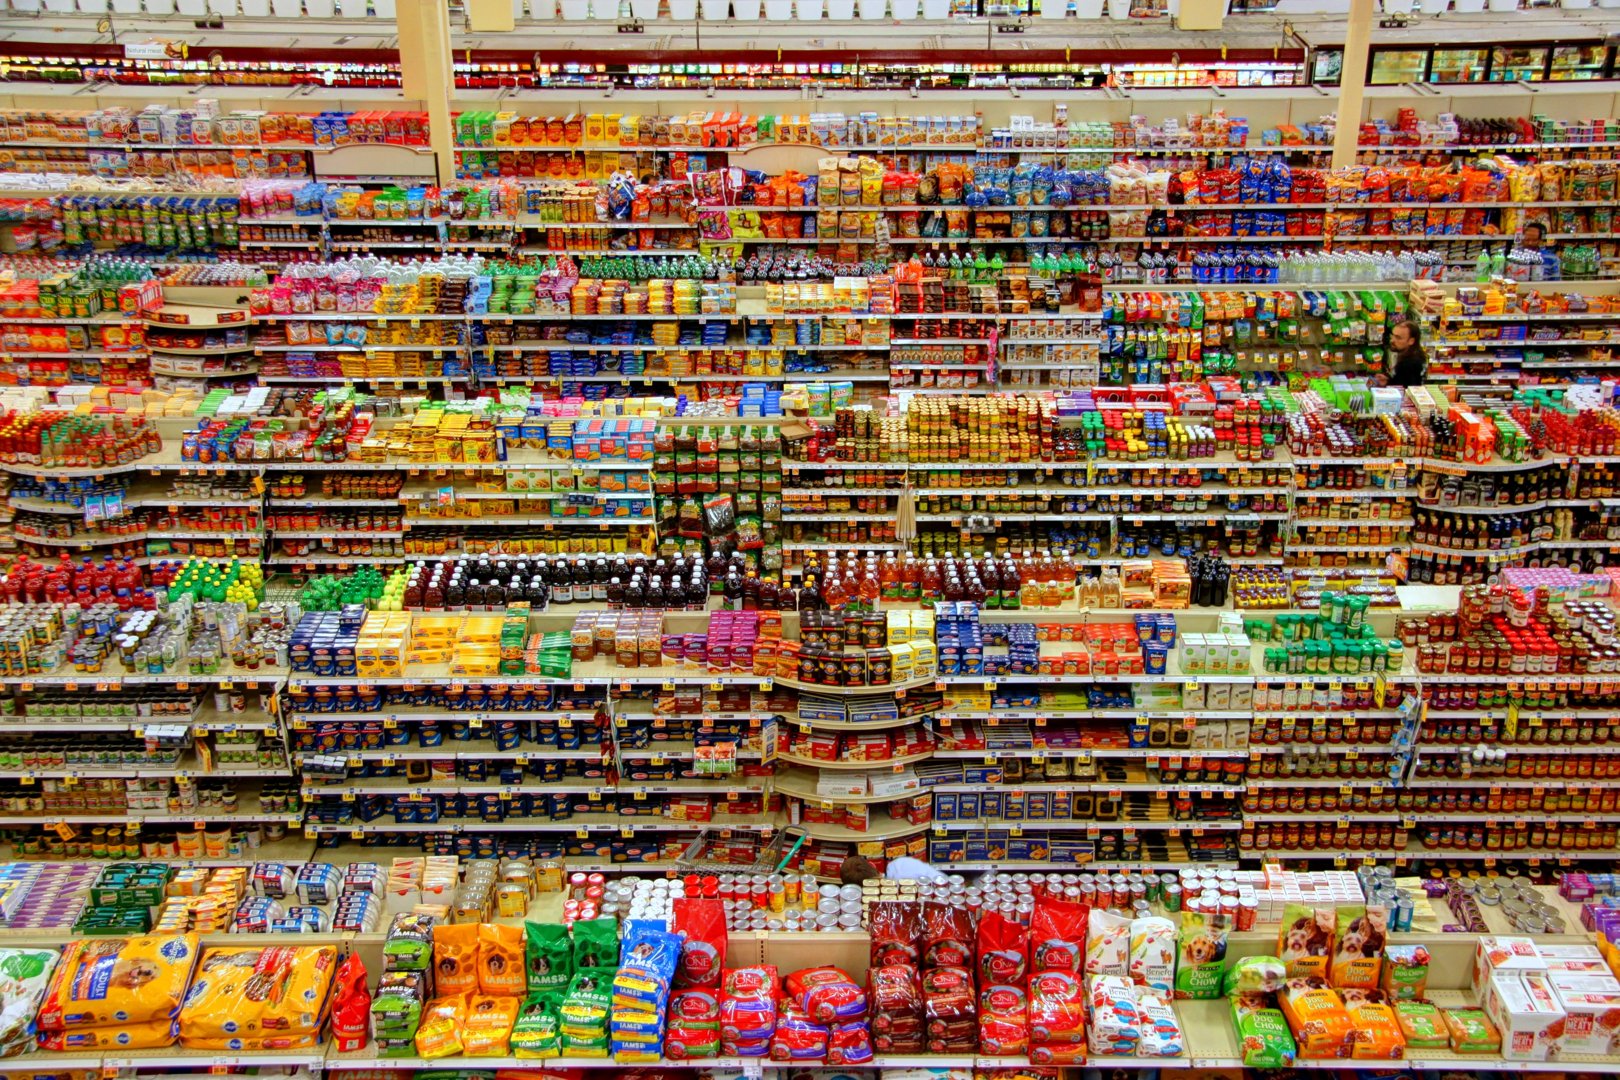 The grocery section of the Fred Meyer hypermarket in Redmond, WA